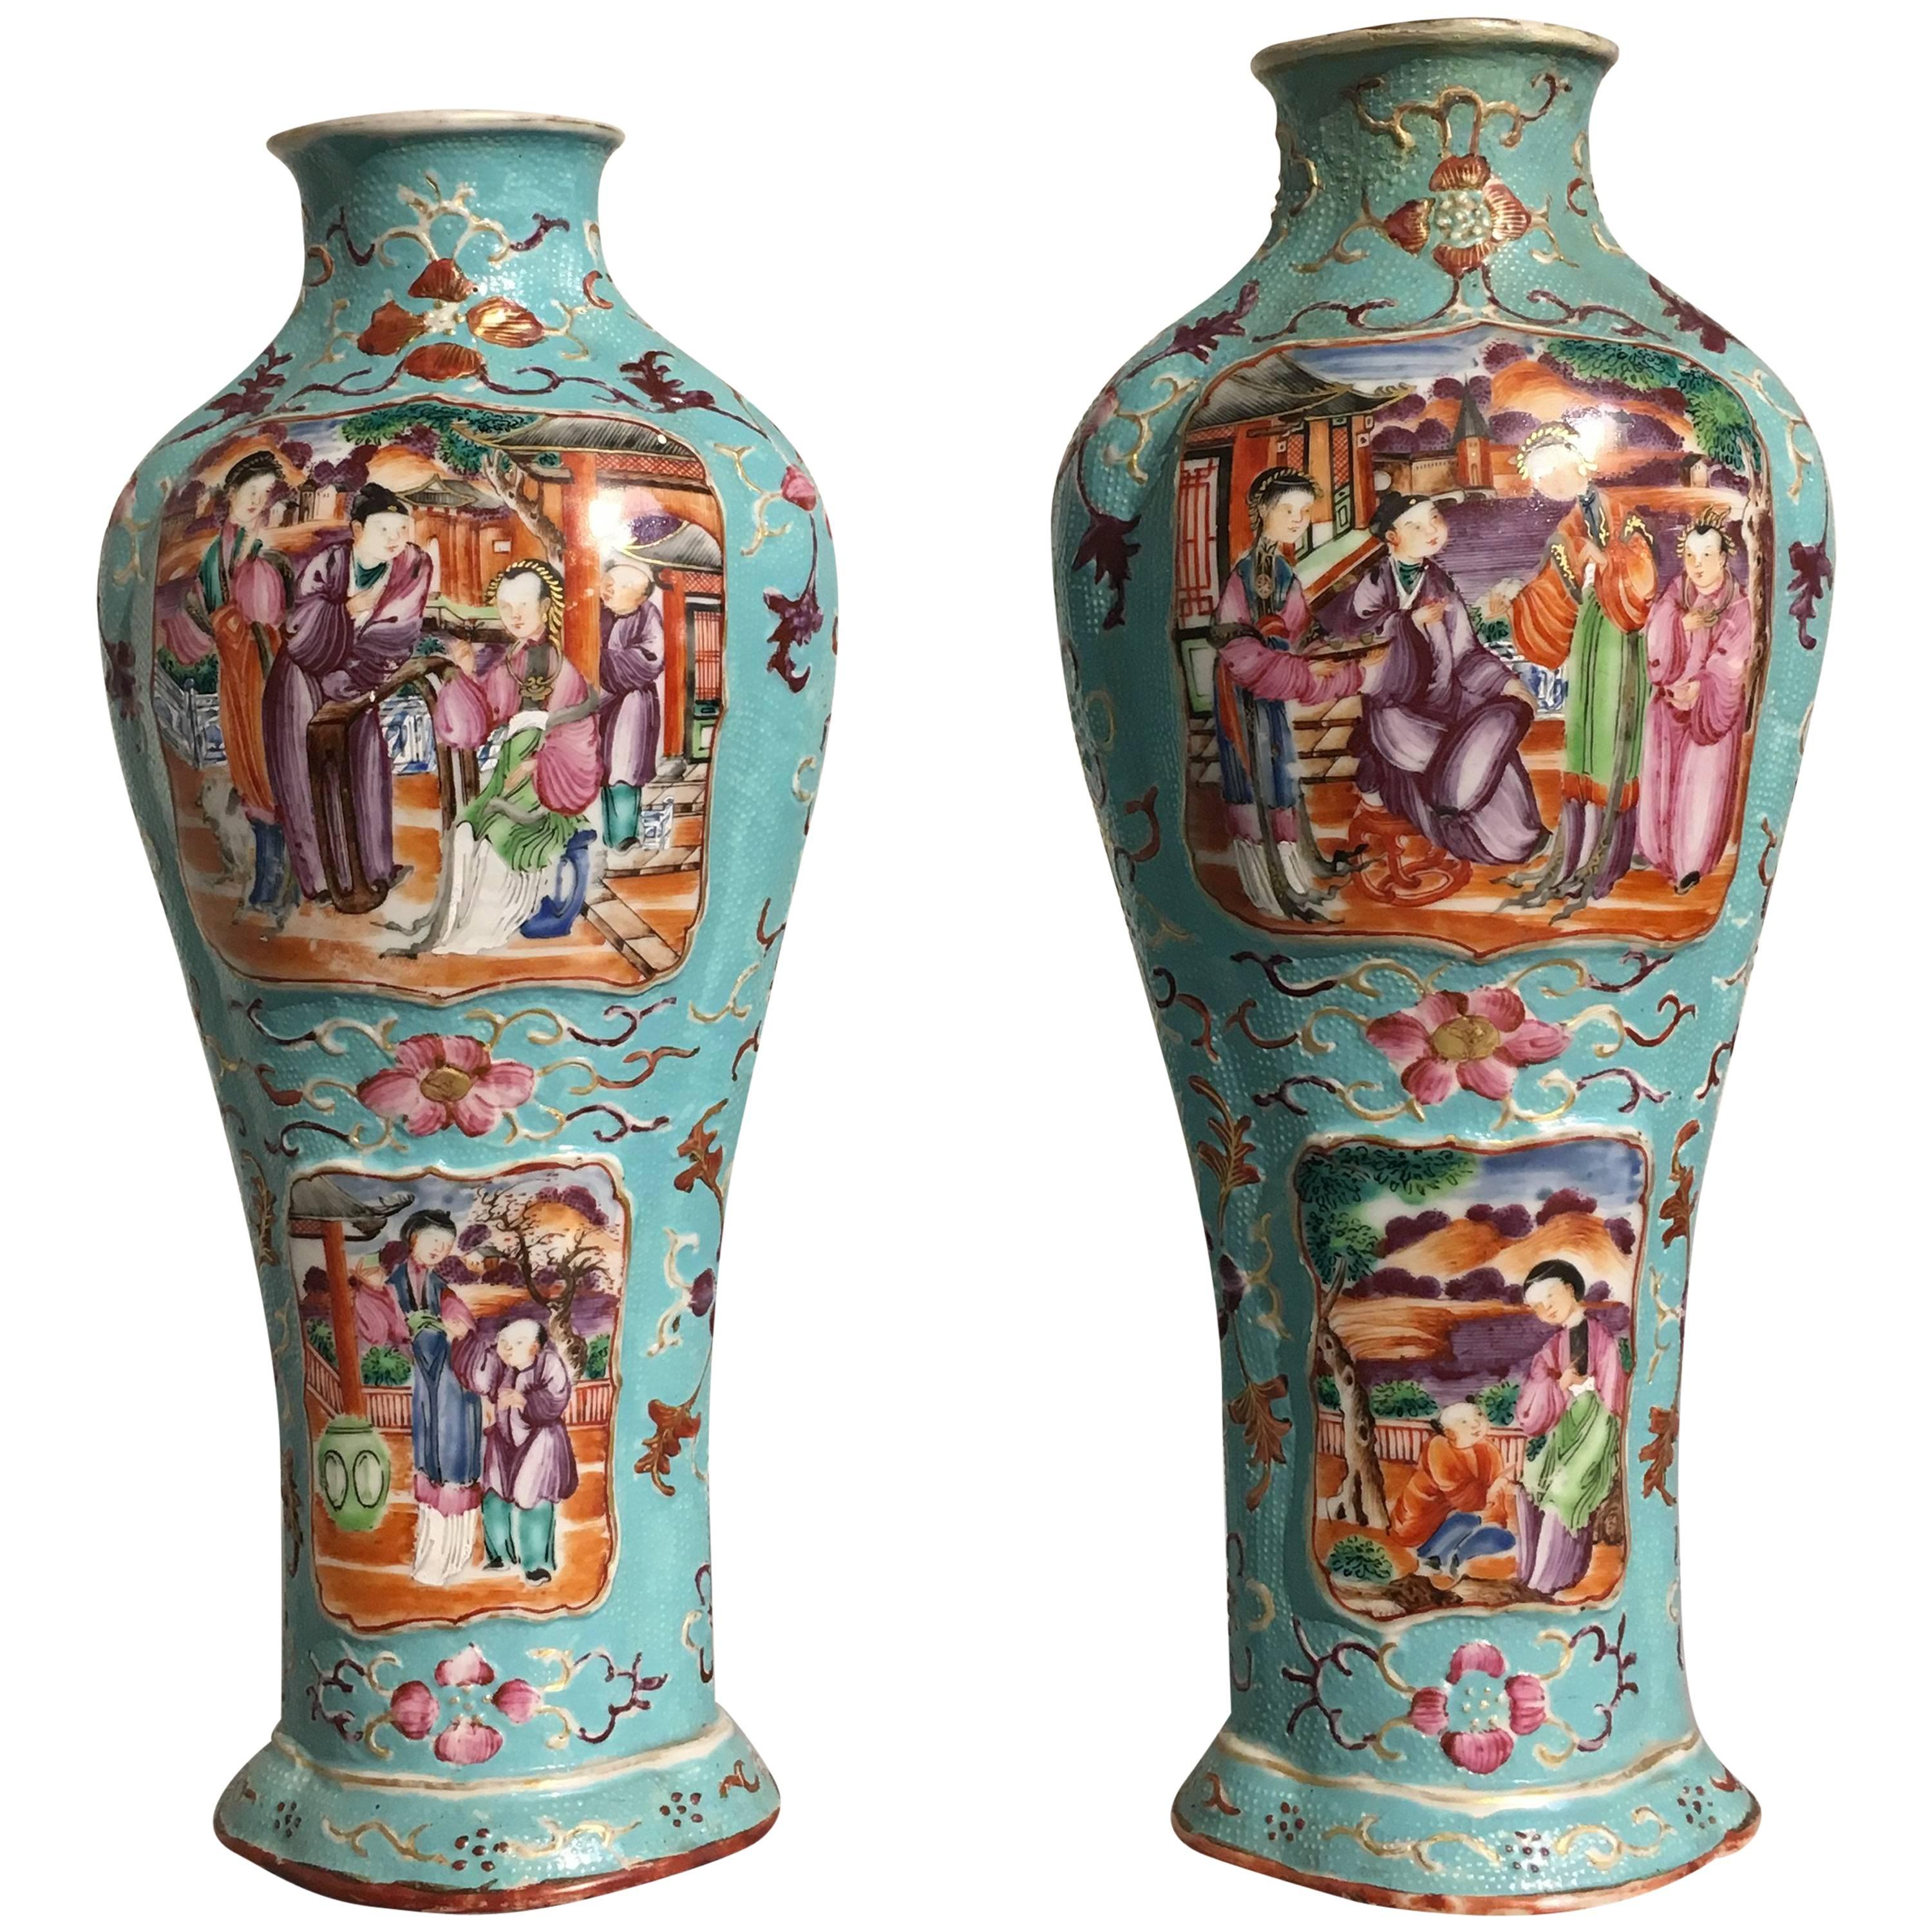 Pair of Late 18th Century Chinese Export Mandarin Turquoise Vases